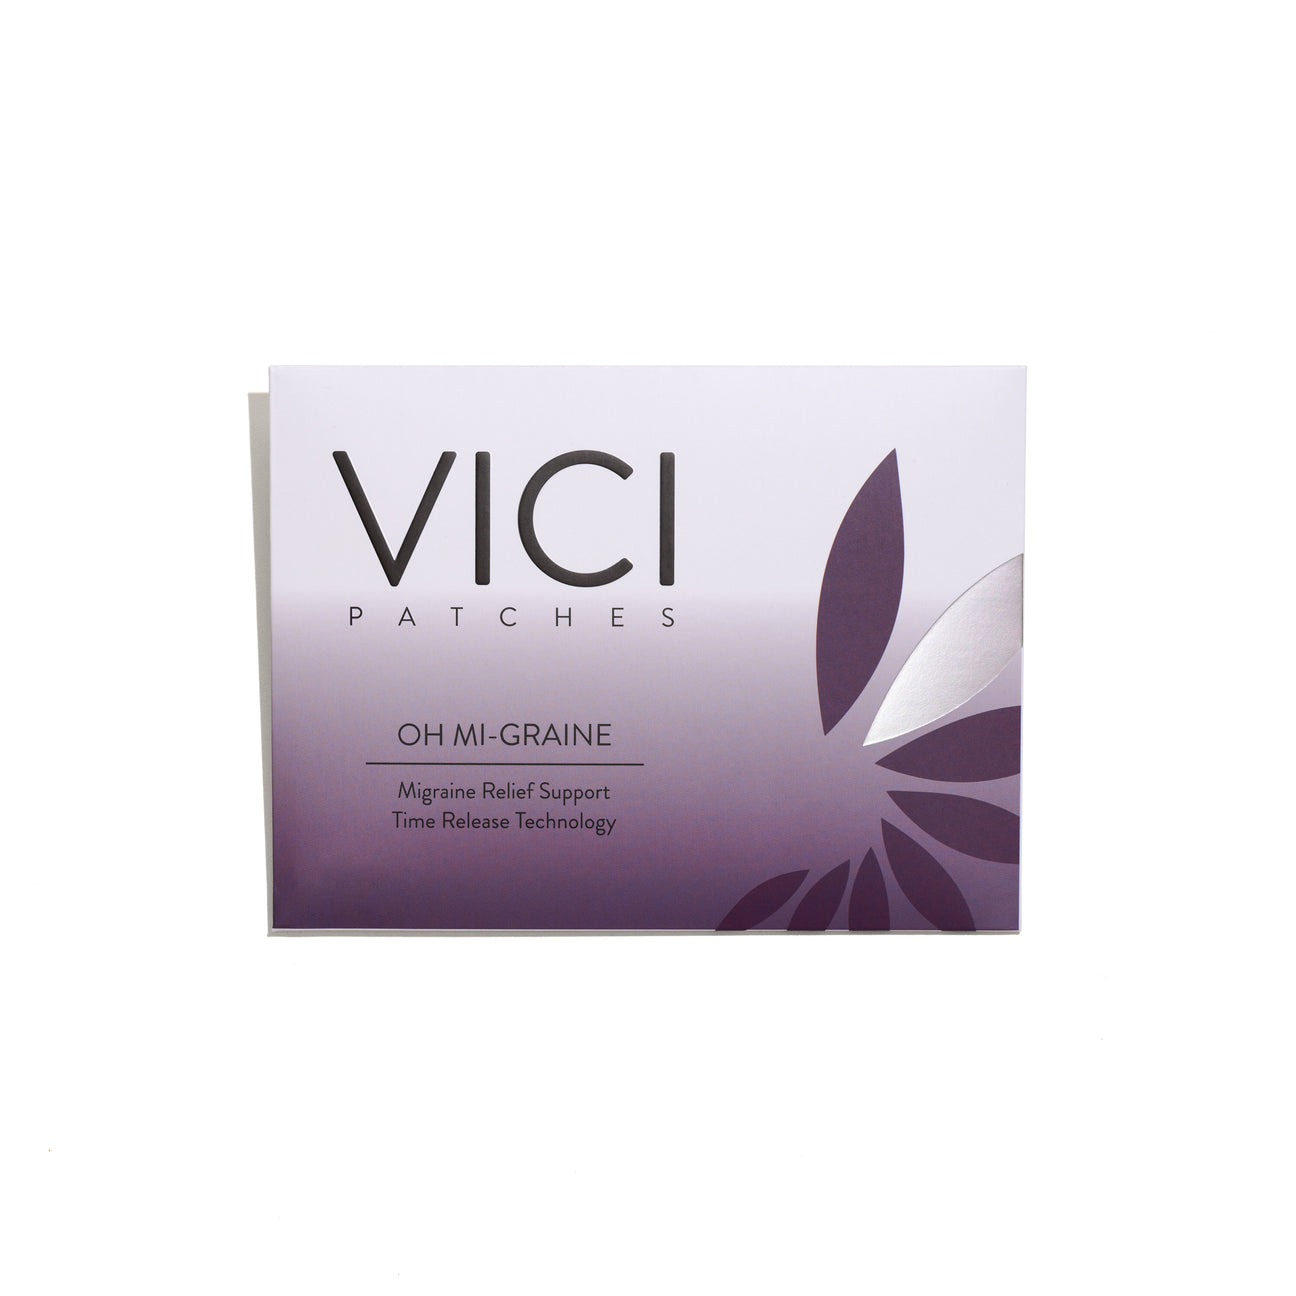 Oh Mi-Graine Patches by Vici Wellness